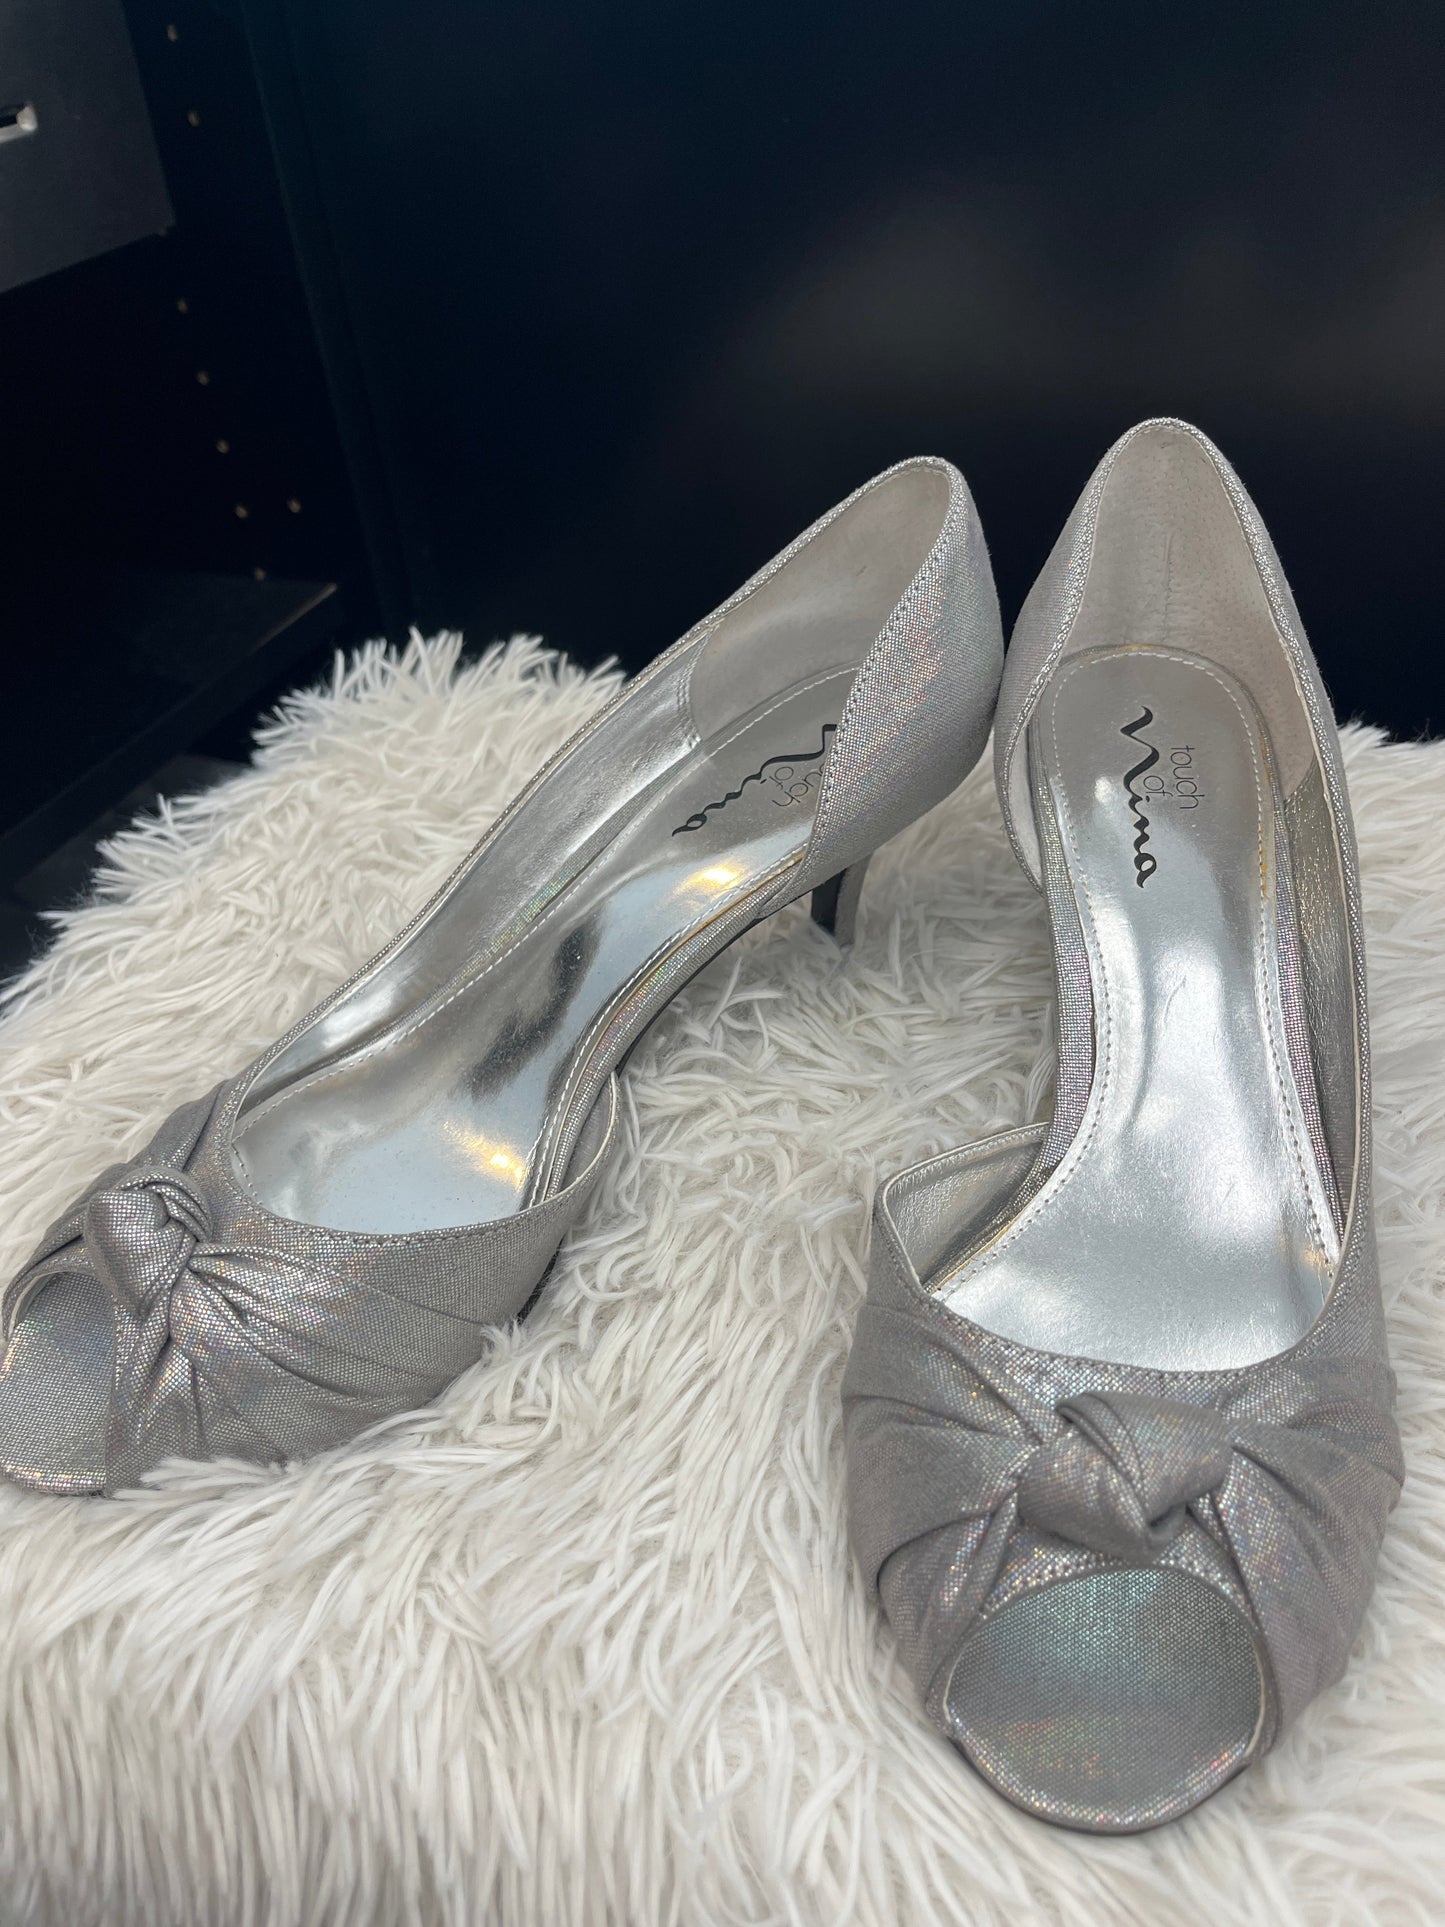 Silver Shoes Heels D Orsay Nina, Size 11